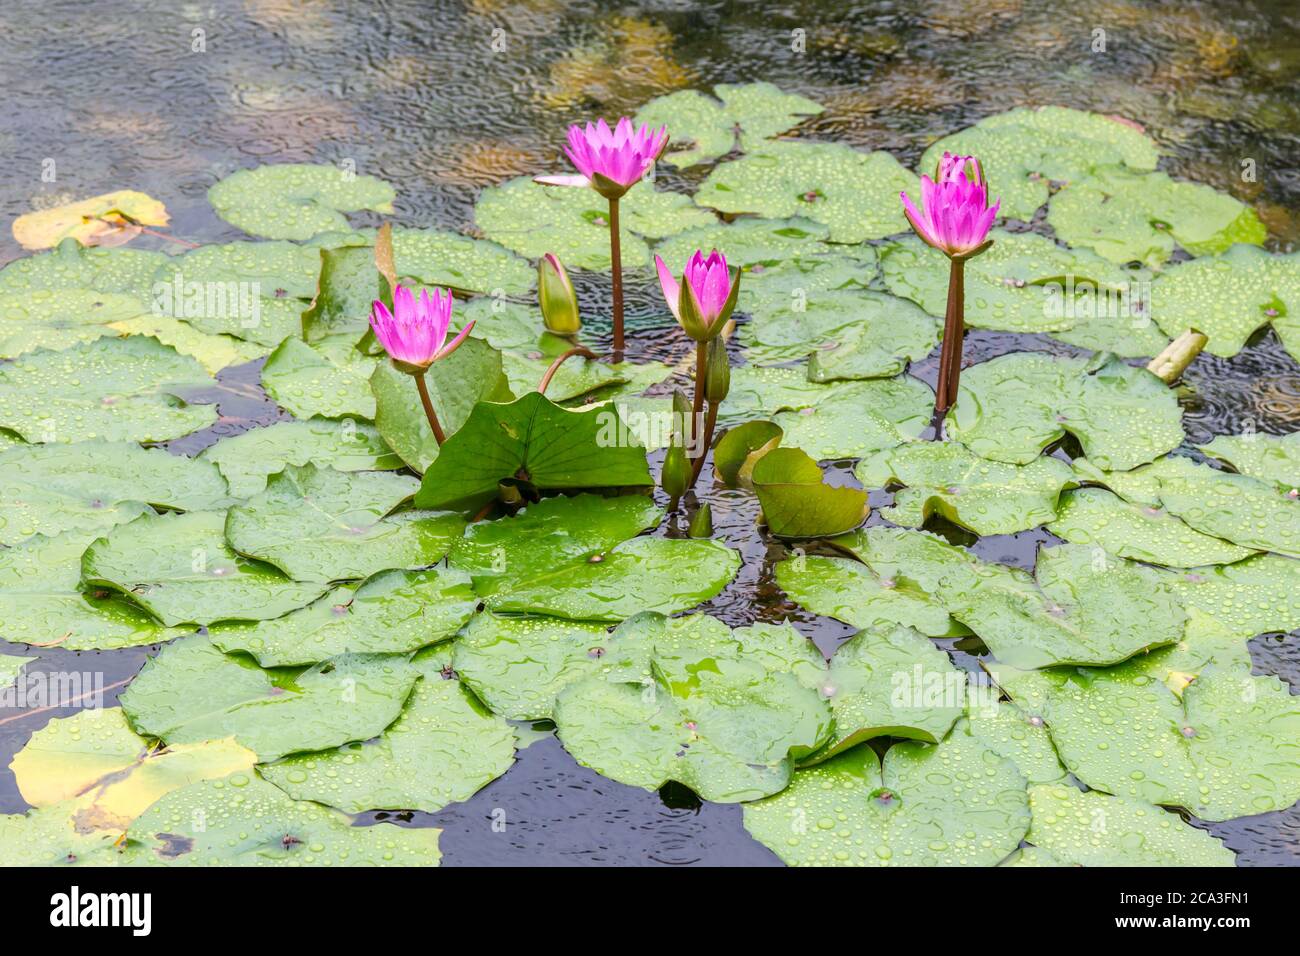 A photograph of water lilies in a pond during a rain shower Stock Photo